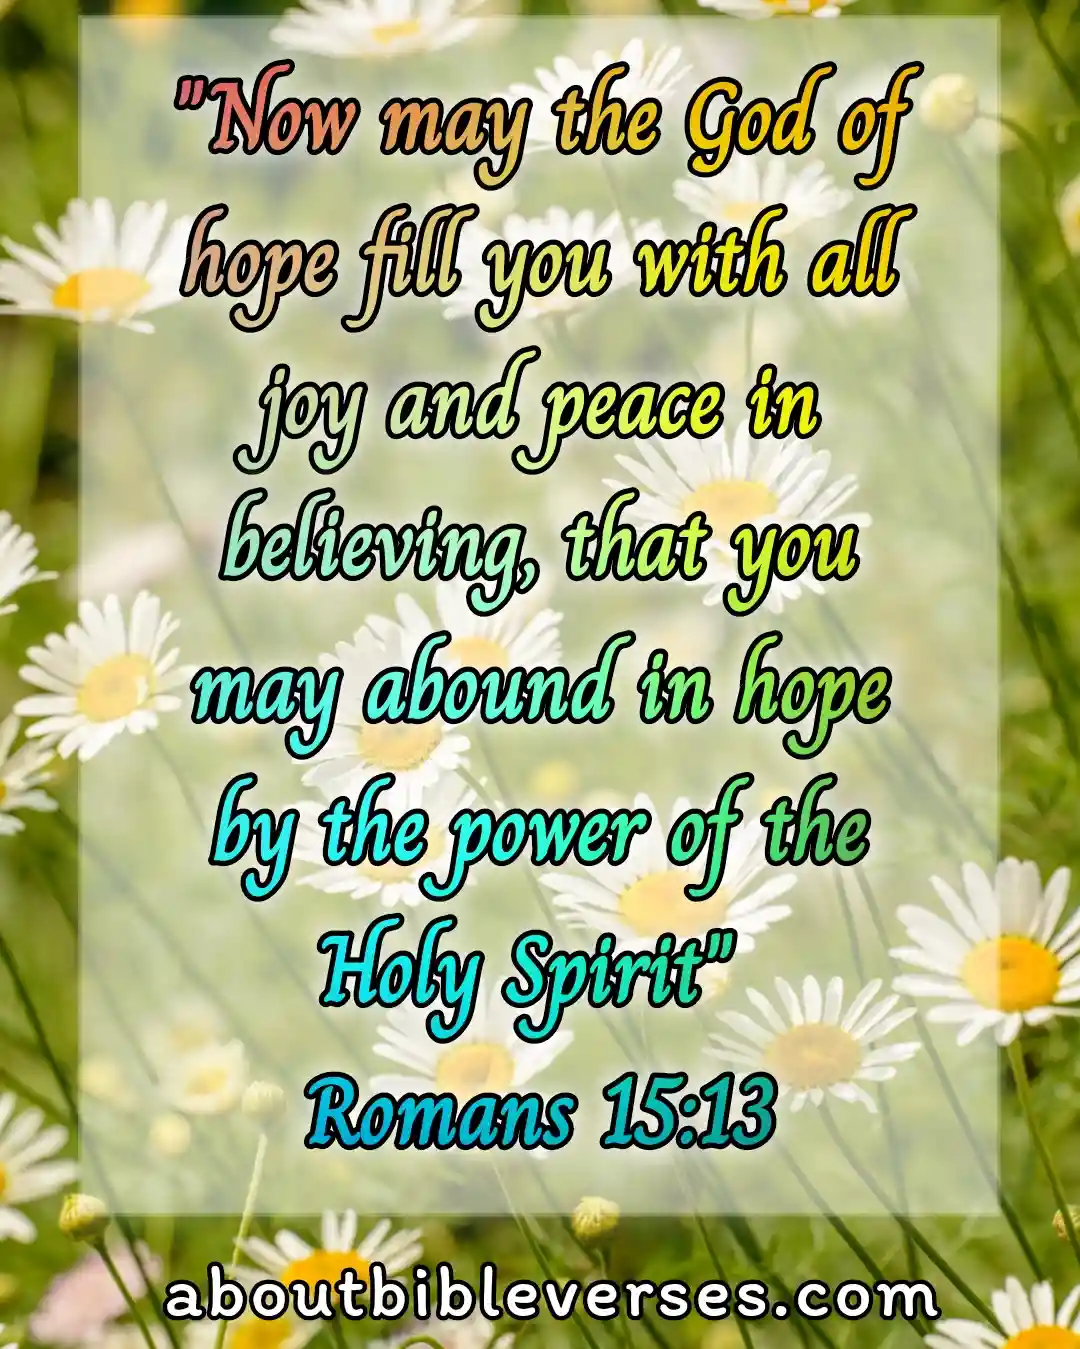 Bible verse about hope for the future (Romans 15:13)